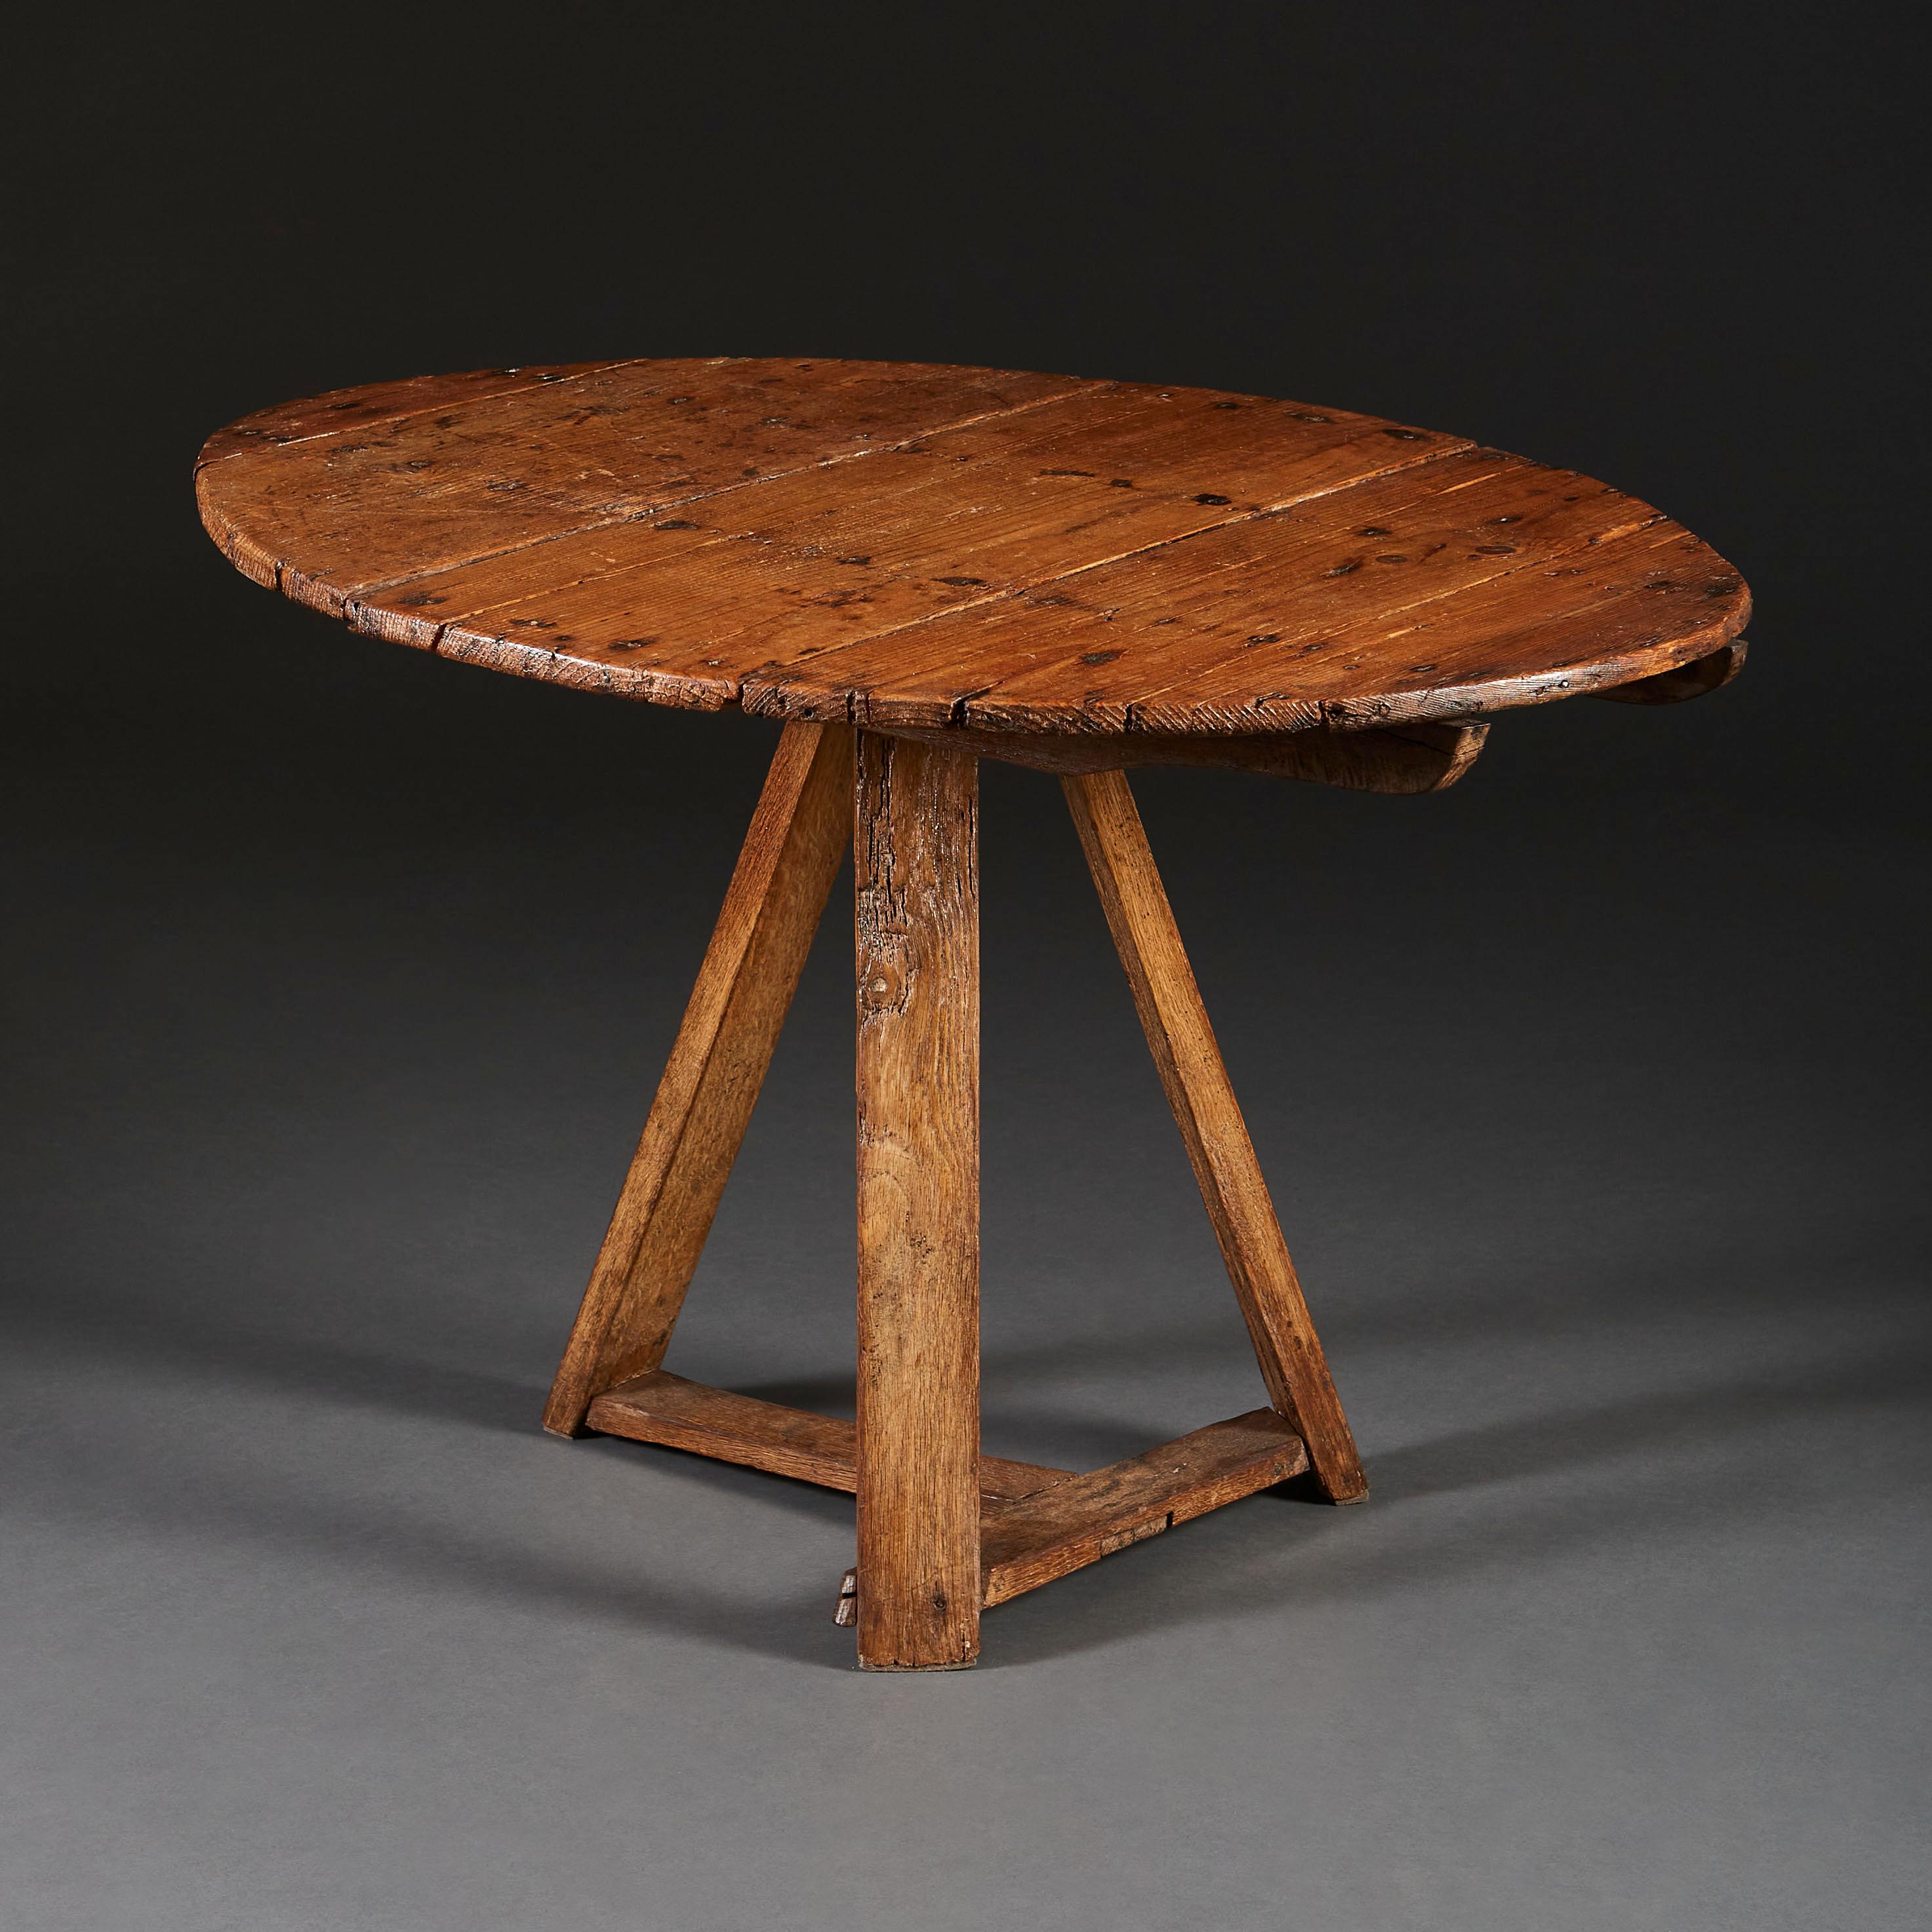 A mid nineteenth century English vernacular pine table, with tripod frame base, the oval tilt top with a peg to the underside of the table.